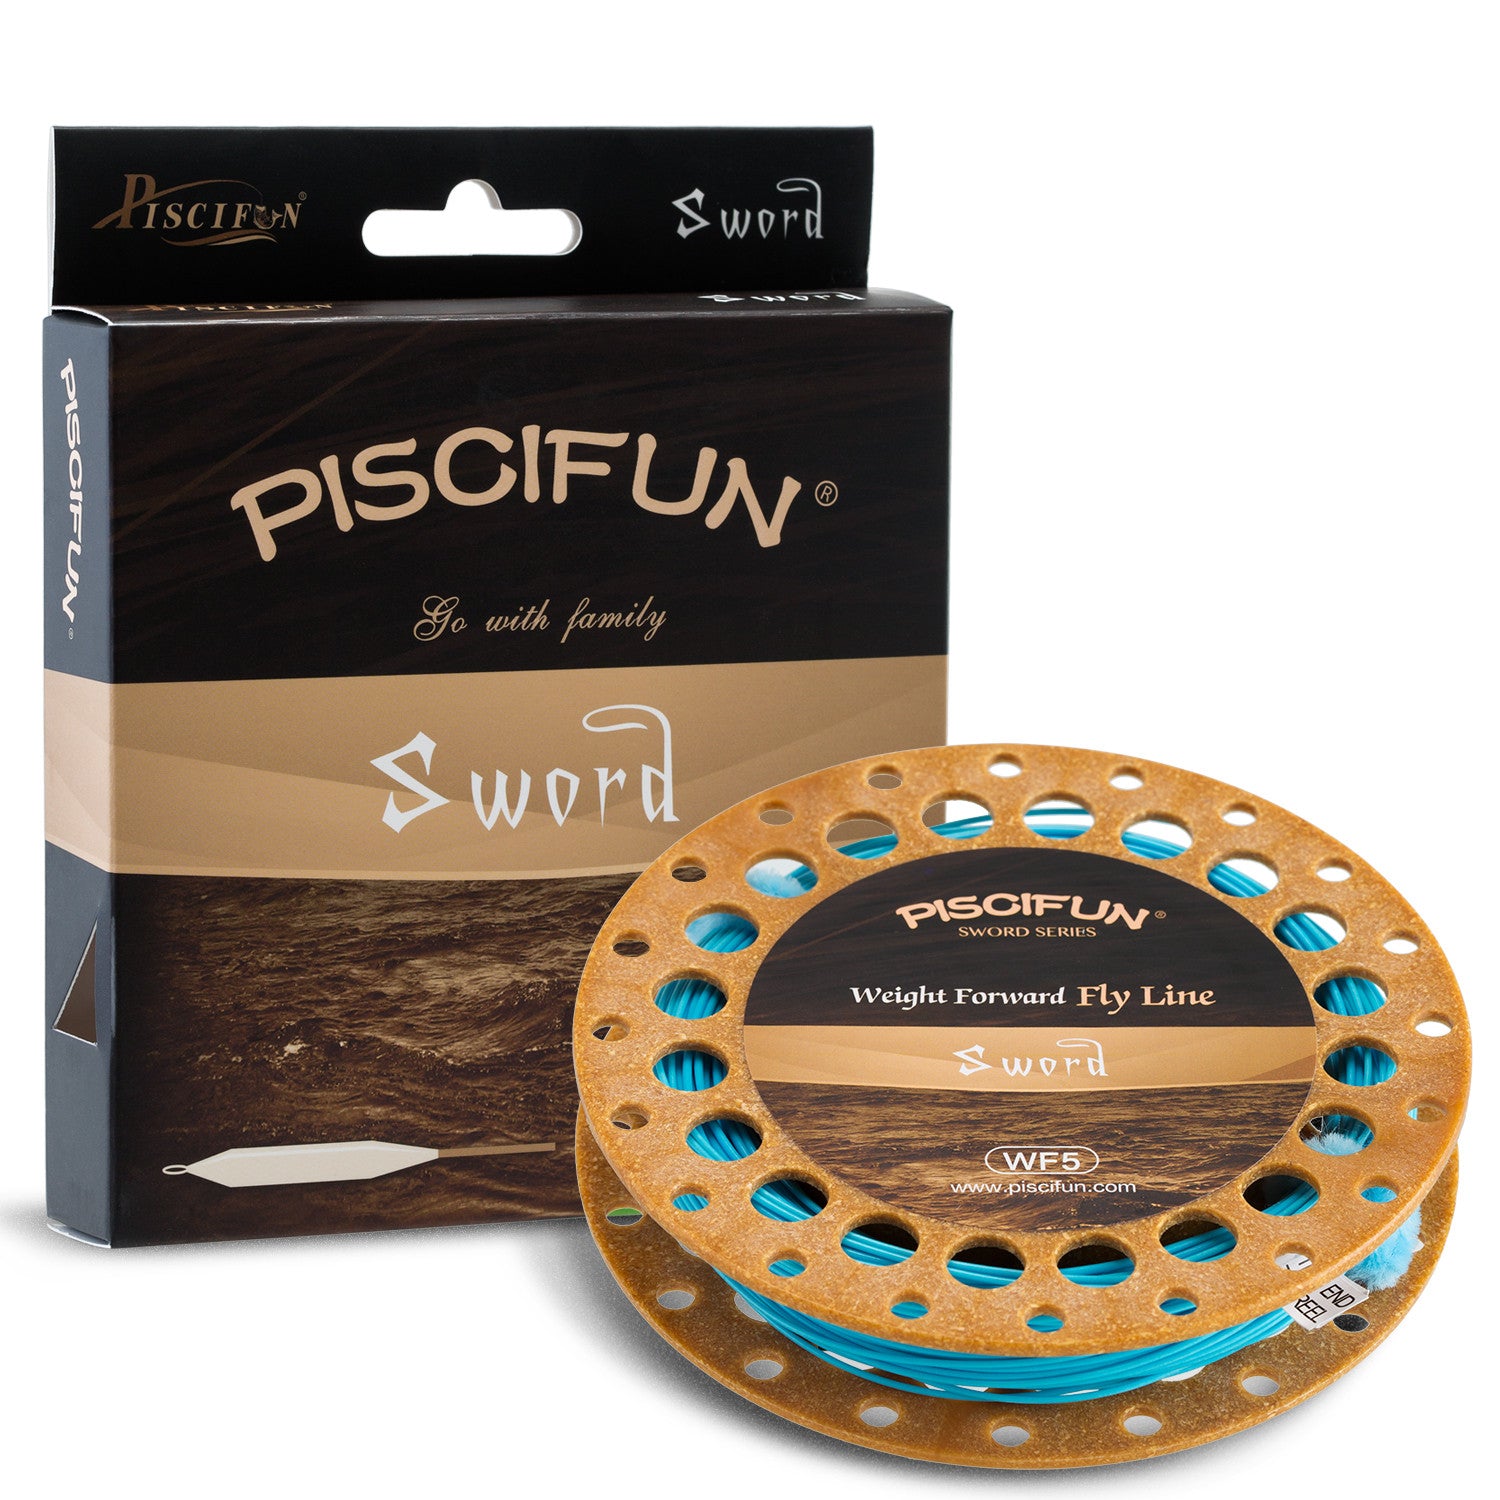 Piscifun® Sword Weight Forward Floating Fly Line Sale